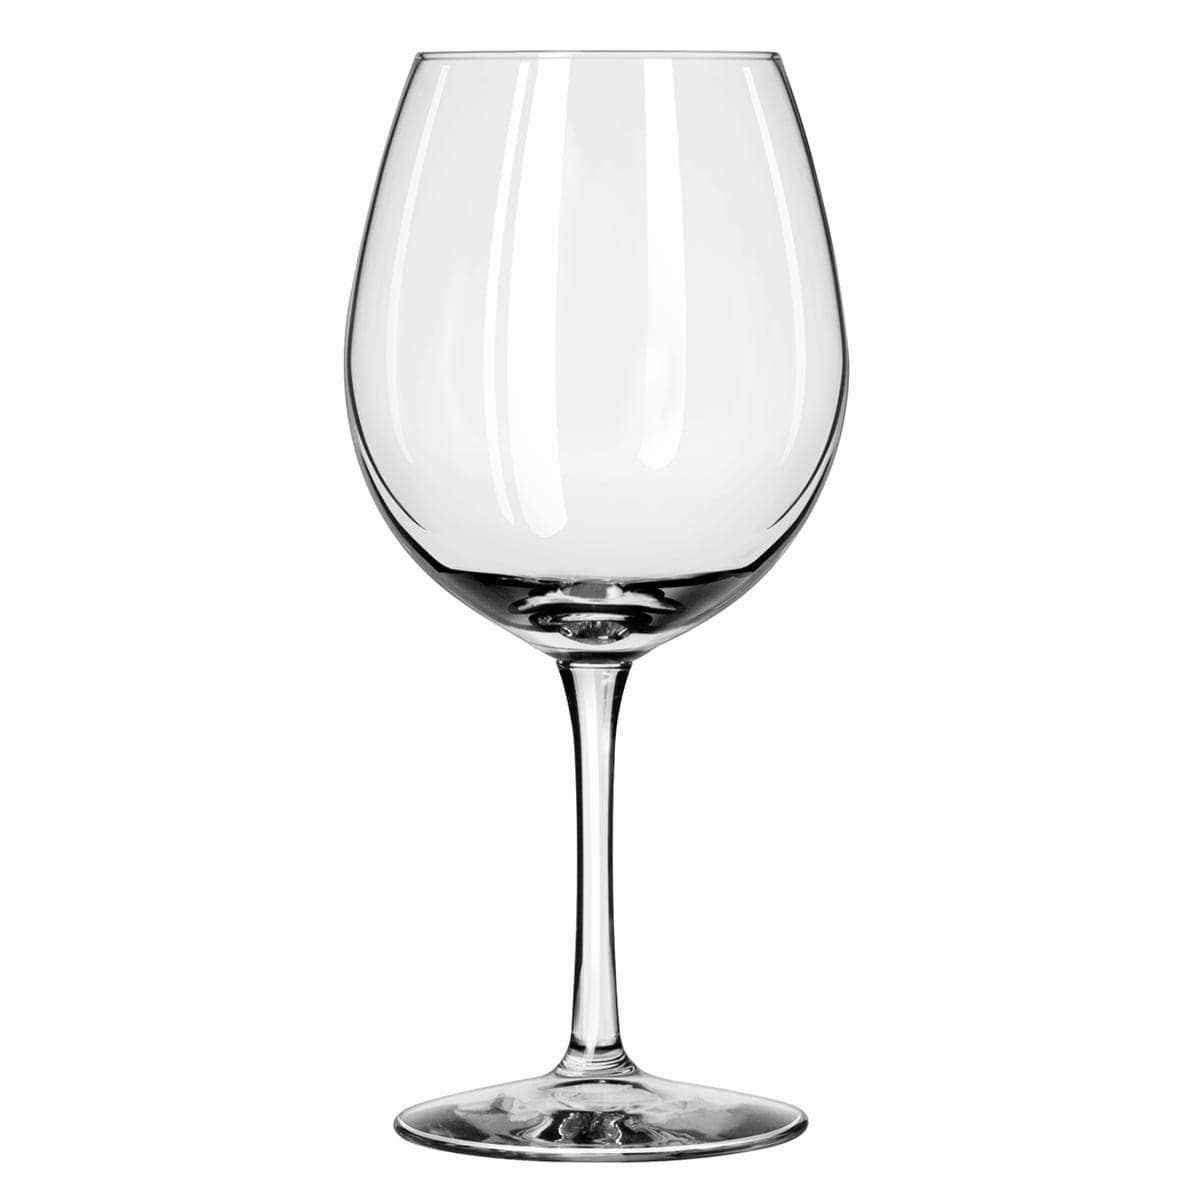 Libbey Entertaining Essentials Balloon Wine Glasses, 18-ounce, Set